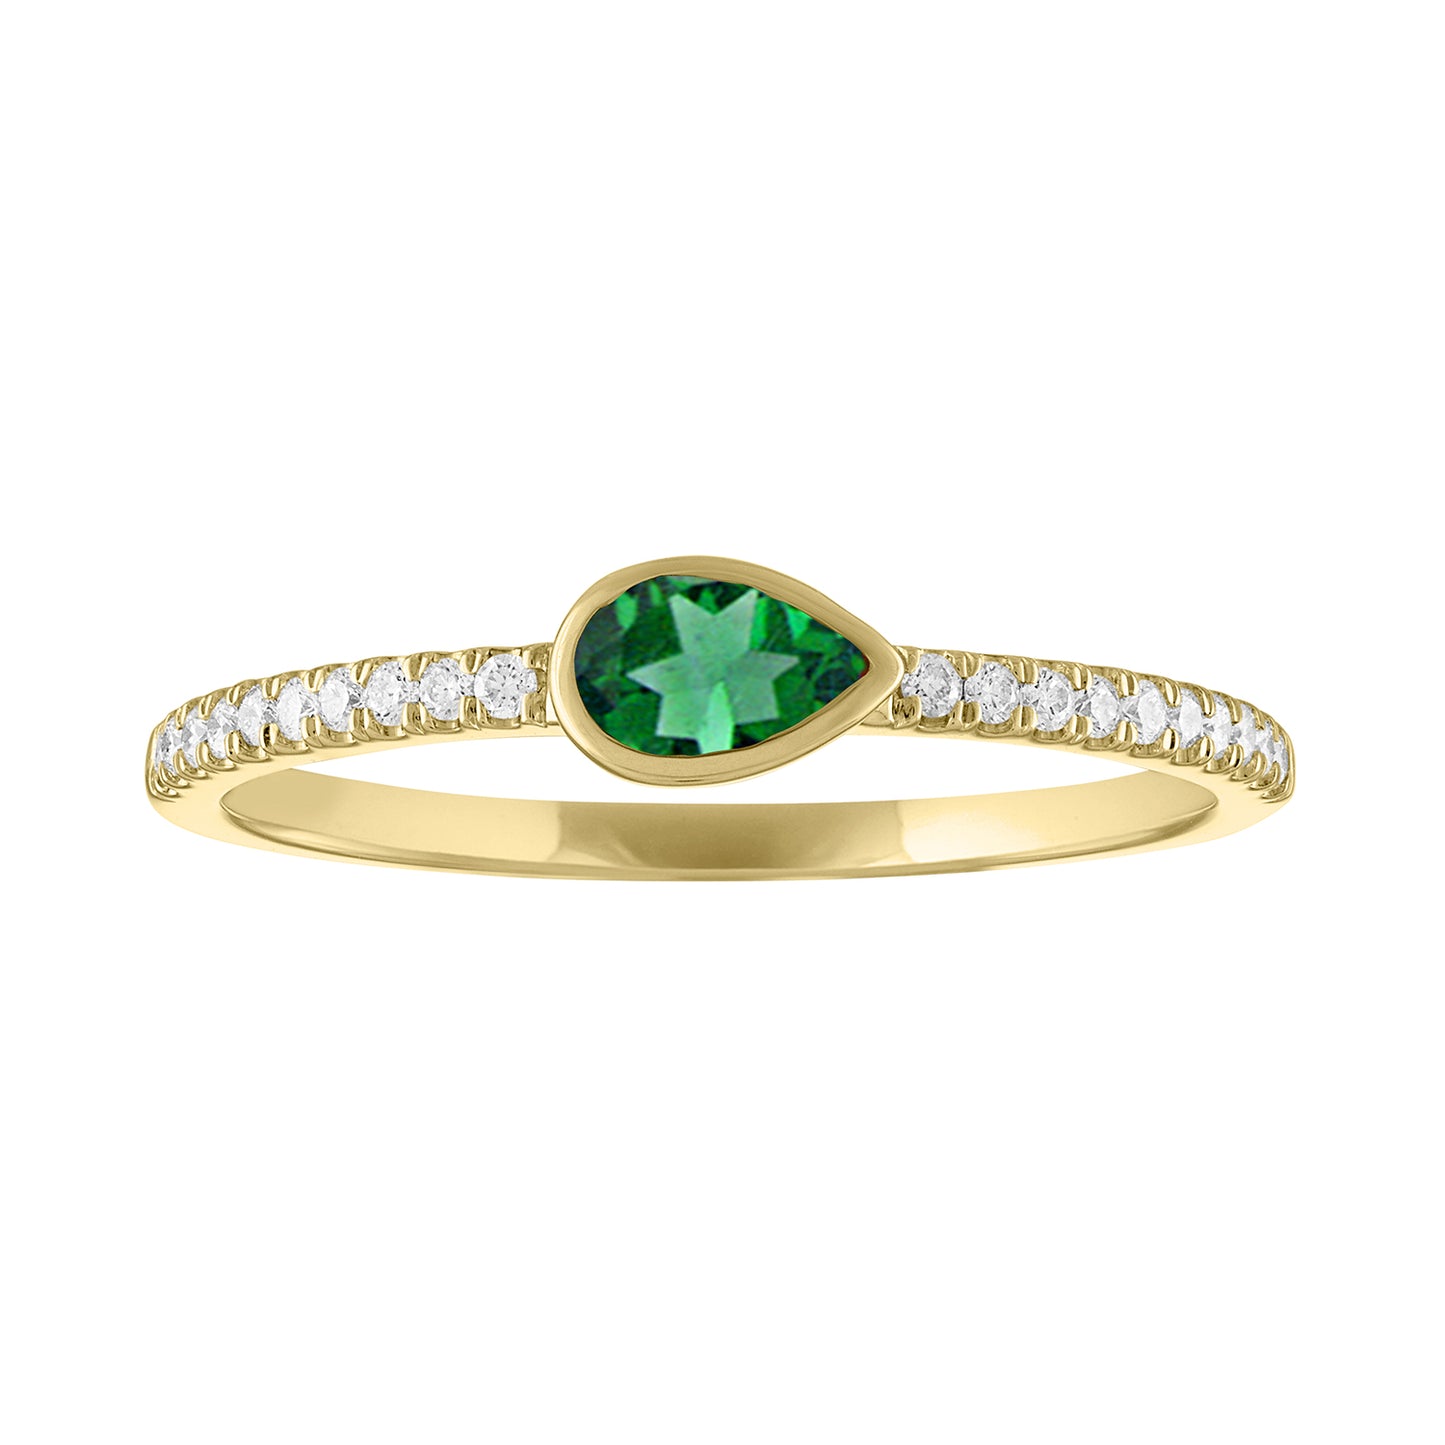 Yellow gold skinny band with a bezeled pear shape emerald in the center and round diamonds on the shank. 